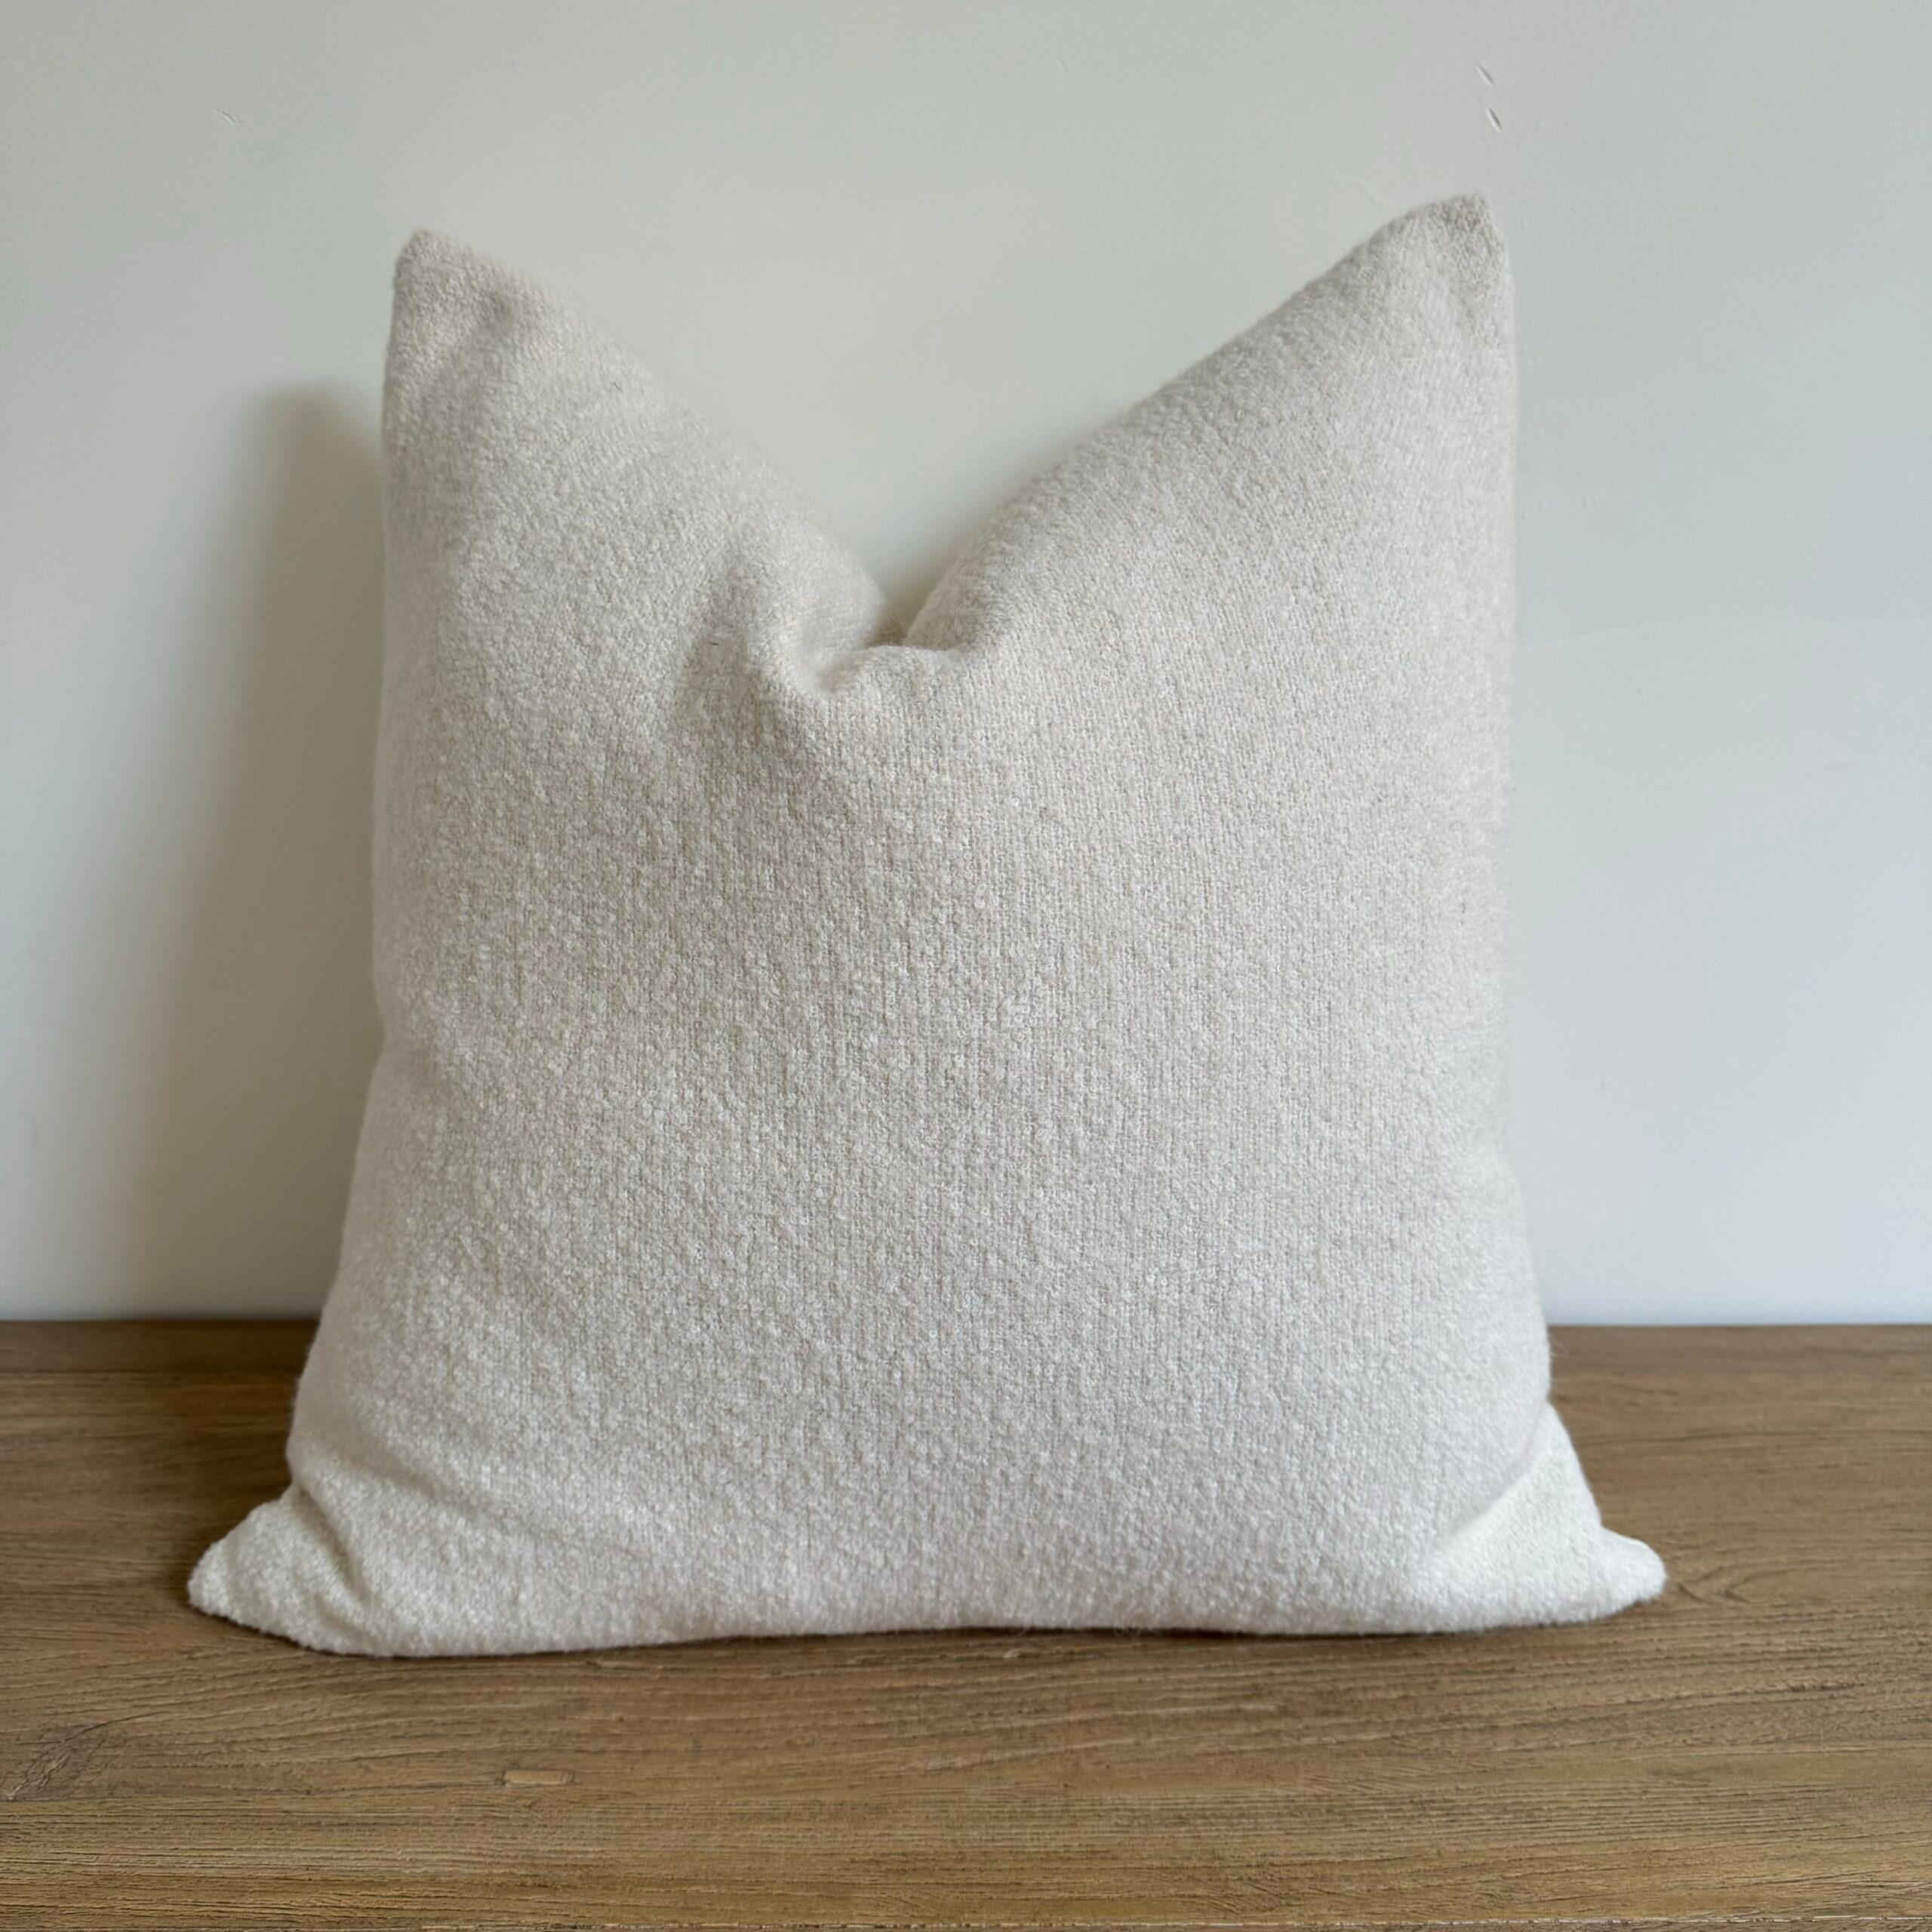 A luxurious heavy woven bouclette wool & linen face with stone washed linen back.
Linen fabric is imported from France.
Custom made to order, can be customized to your size.
Color: Blanc
Antique brass zipper
Size 22x22
Includes Down Feather